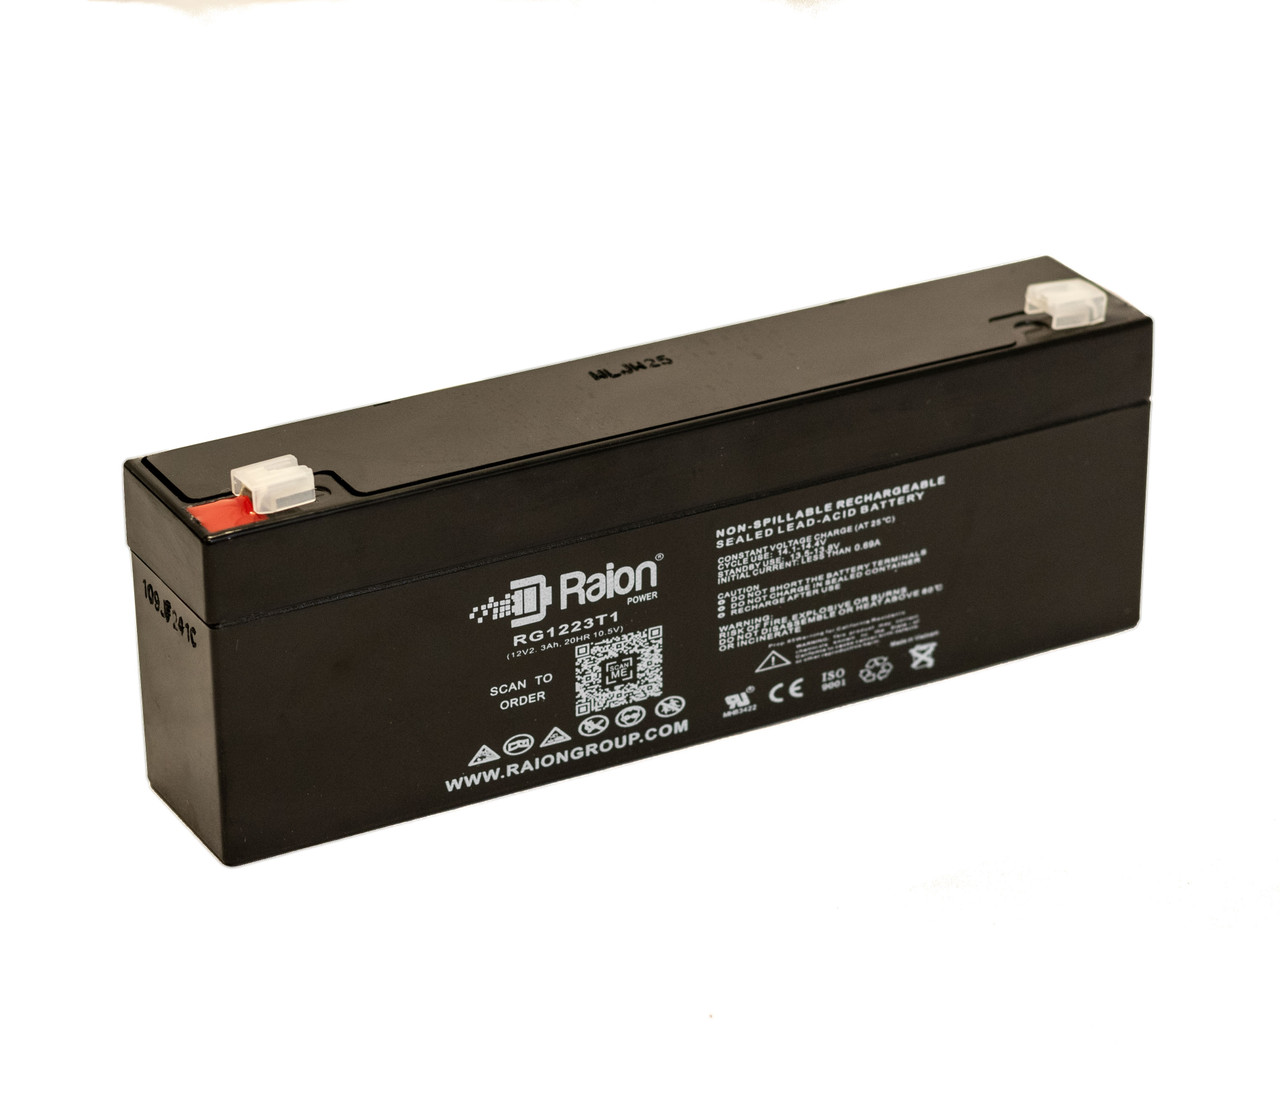 Raion Power RG1223T1 Replacement Battery for Avi 100 INF Pump